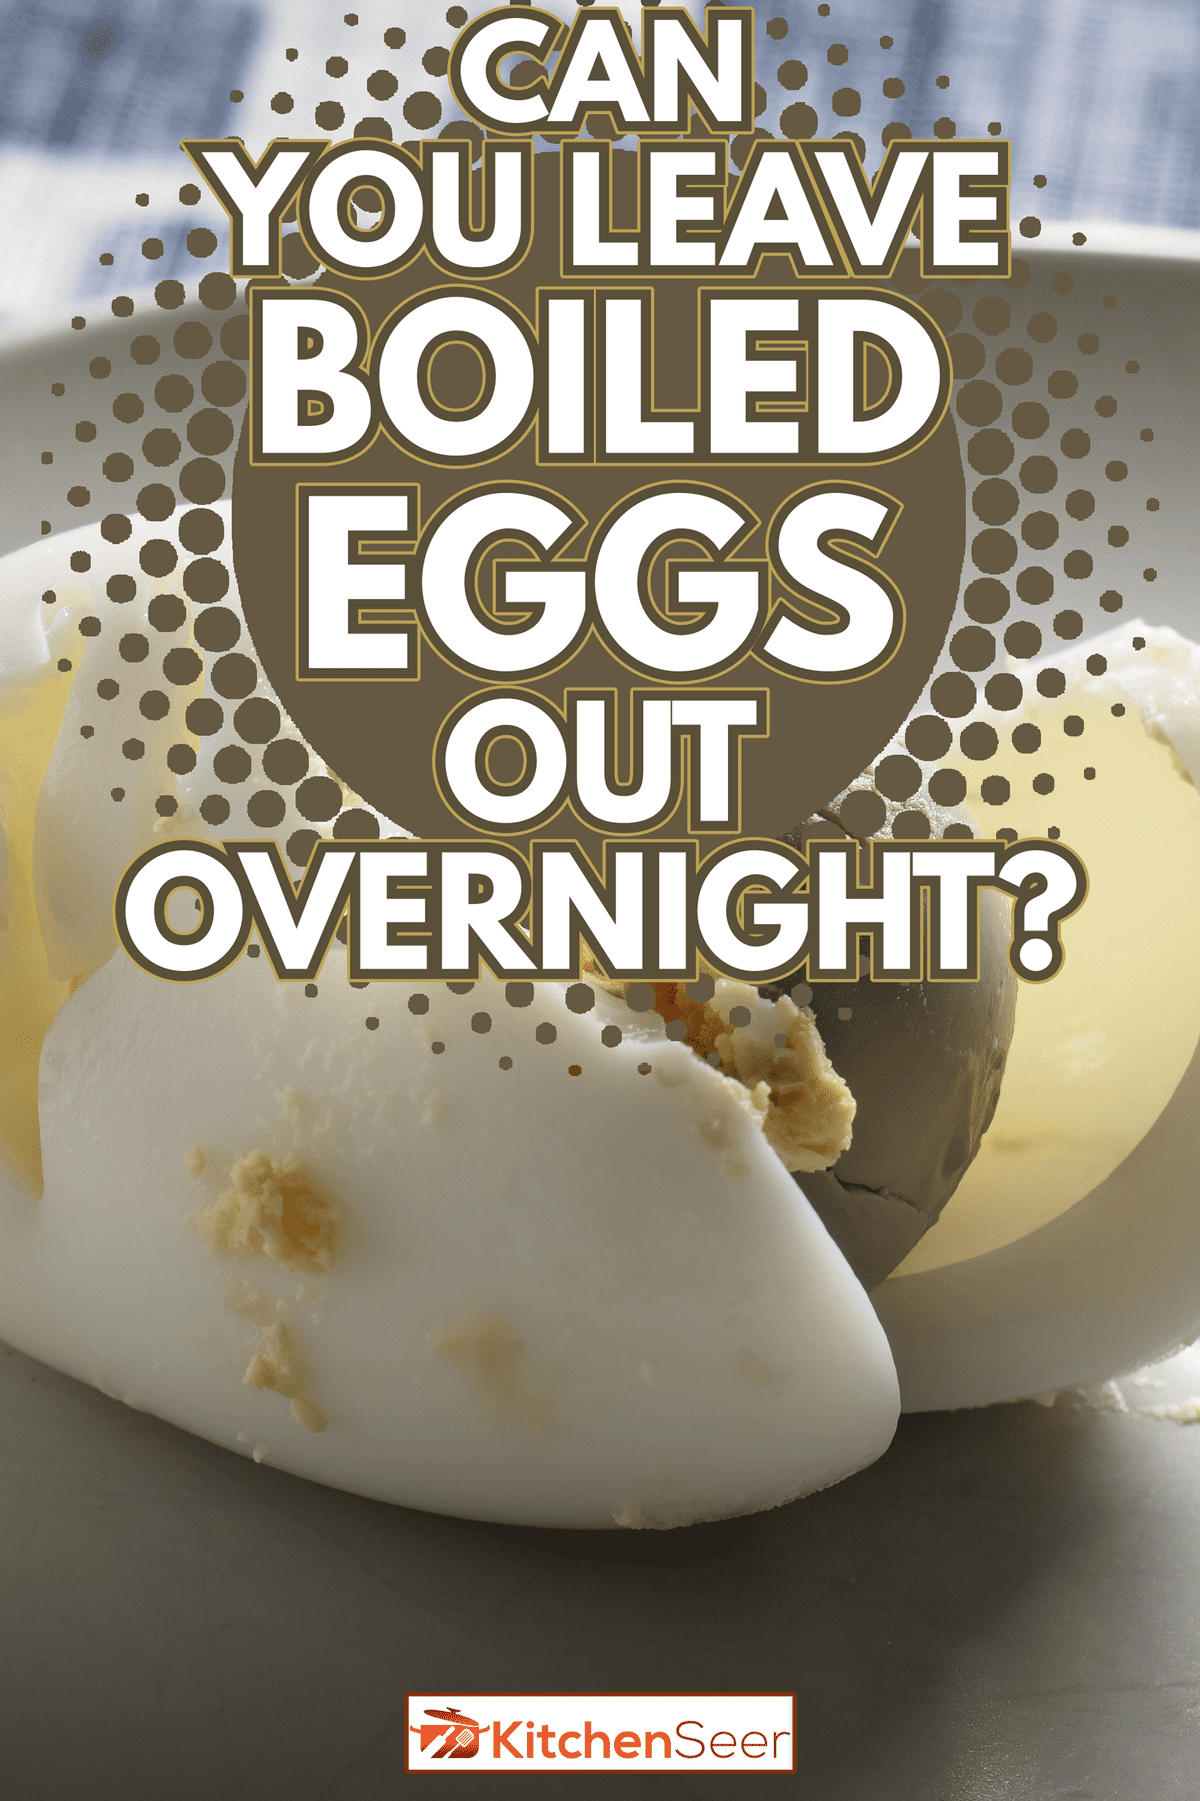 Overcooked Hard Boiled Egg with green or grey tint around the yolk - Can You Leave Boiled Eggs Out Overnight